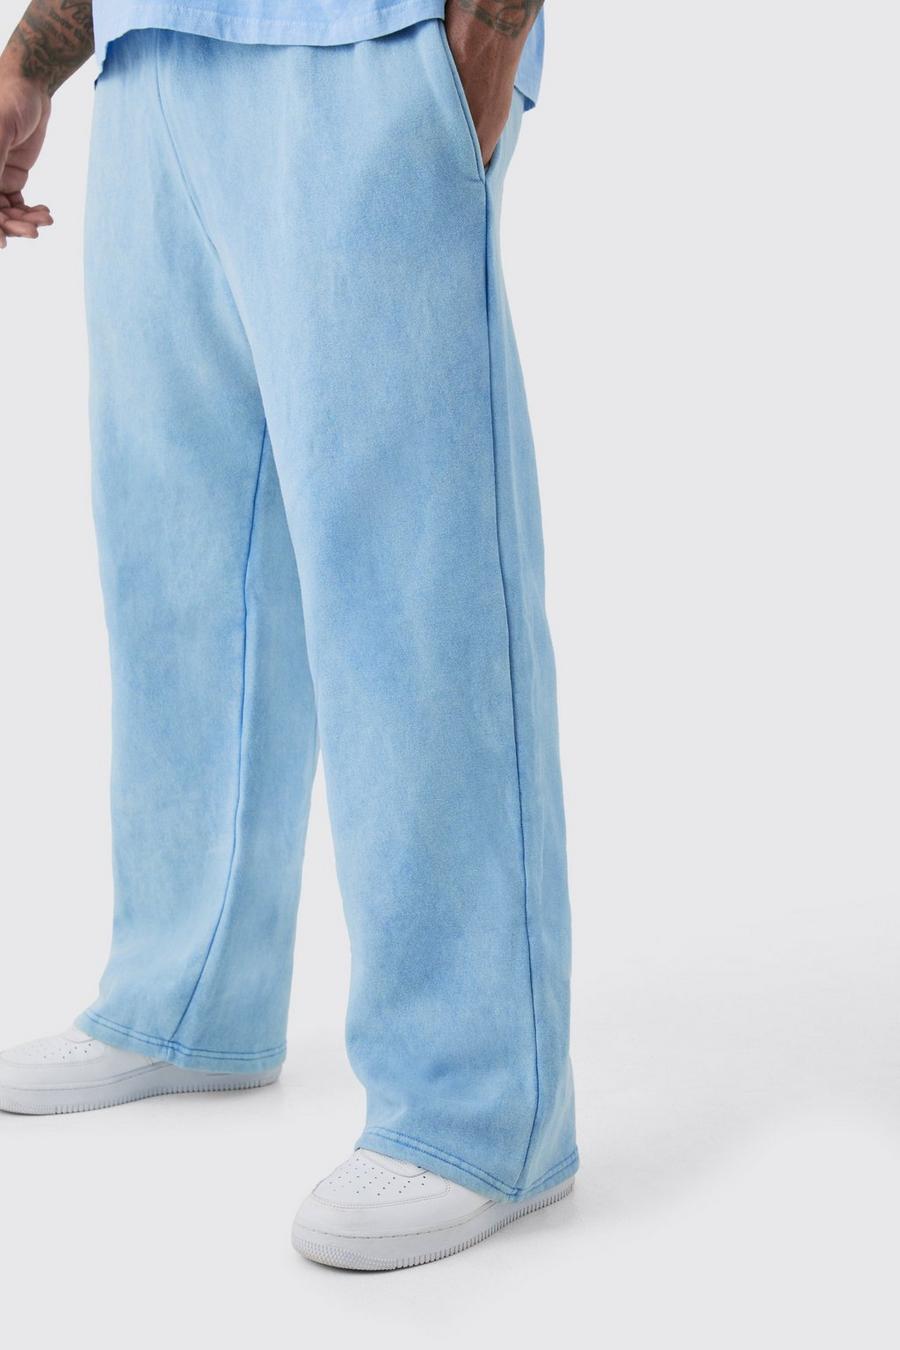 Cornflower blue Plus Relaxed Fit Laundered Wash Jogger